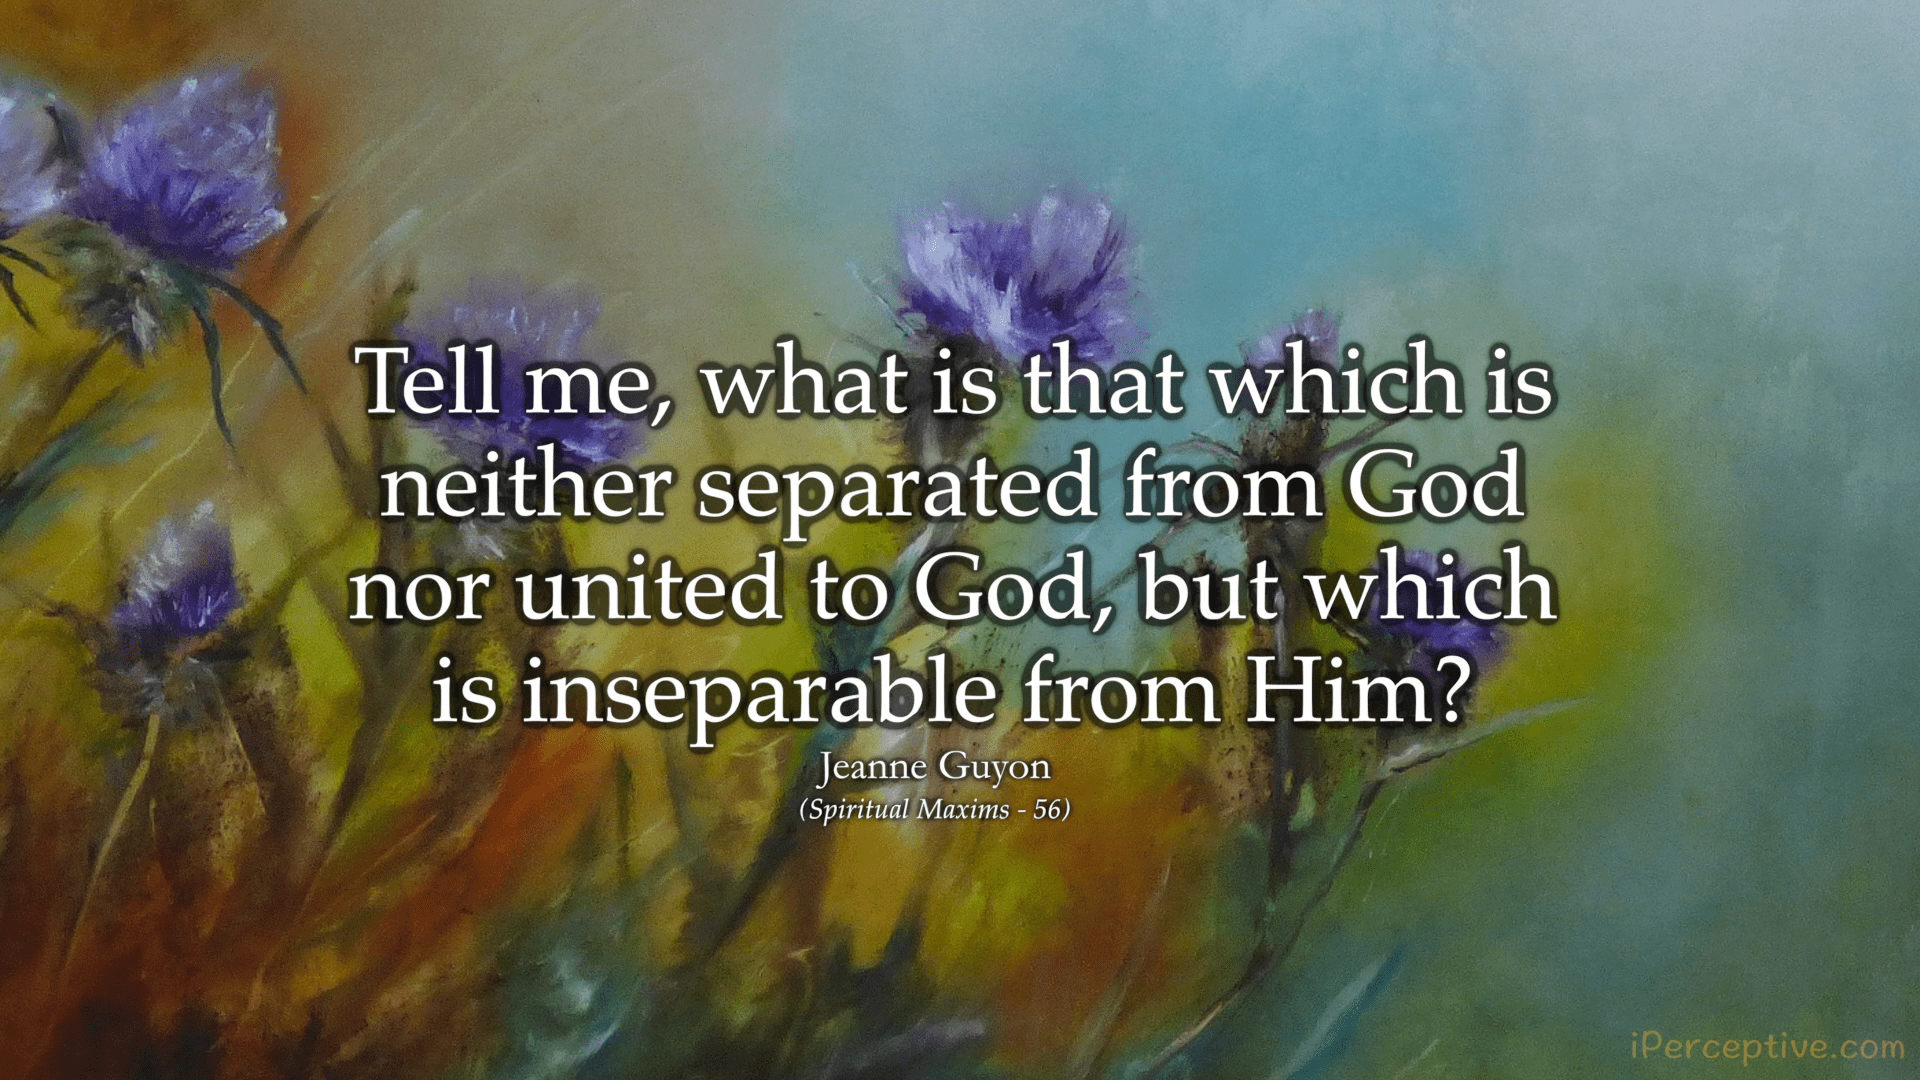 Jeanne Guyon Quote: Tell me what is neither separated from God nor united to God...